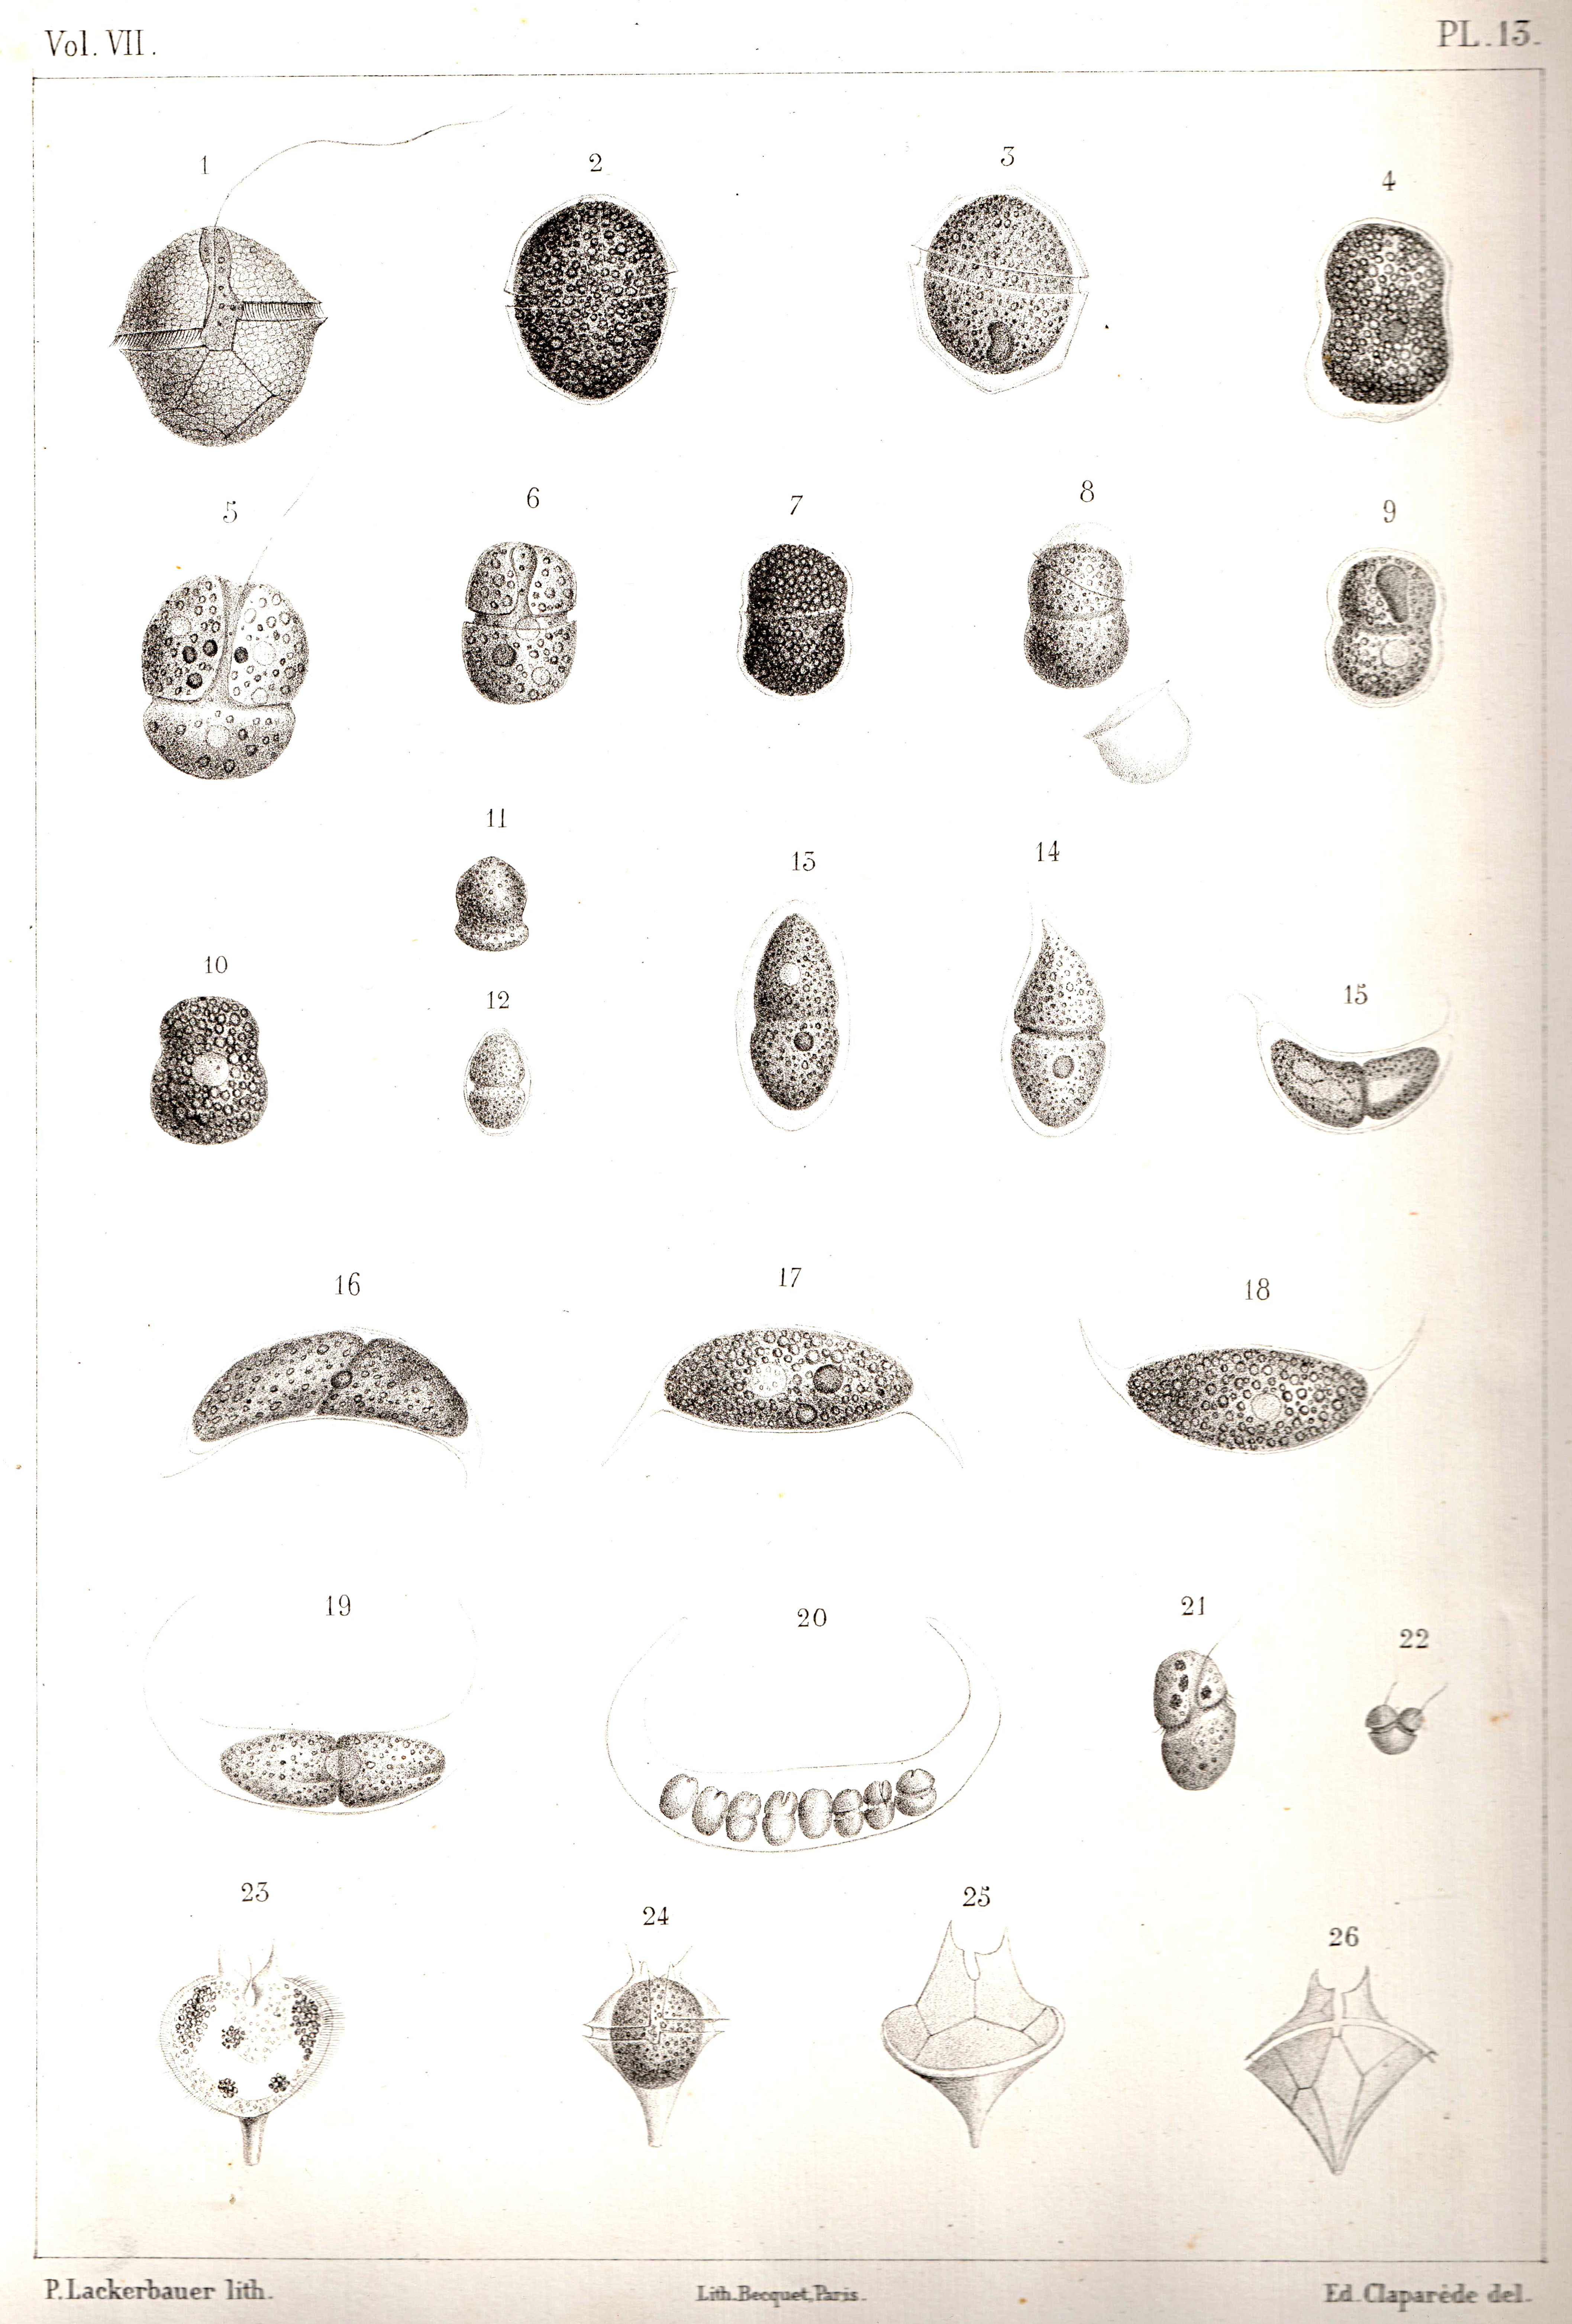 Plate 13 (part 2)